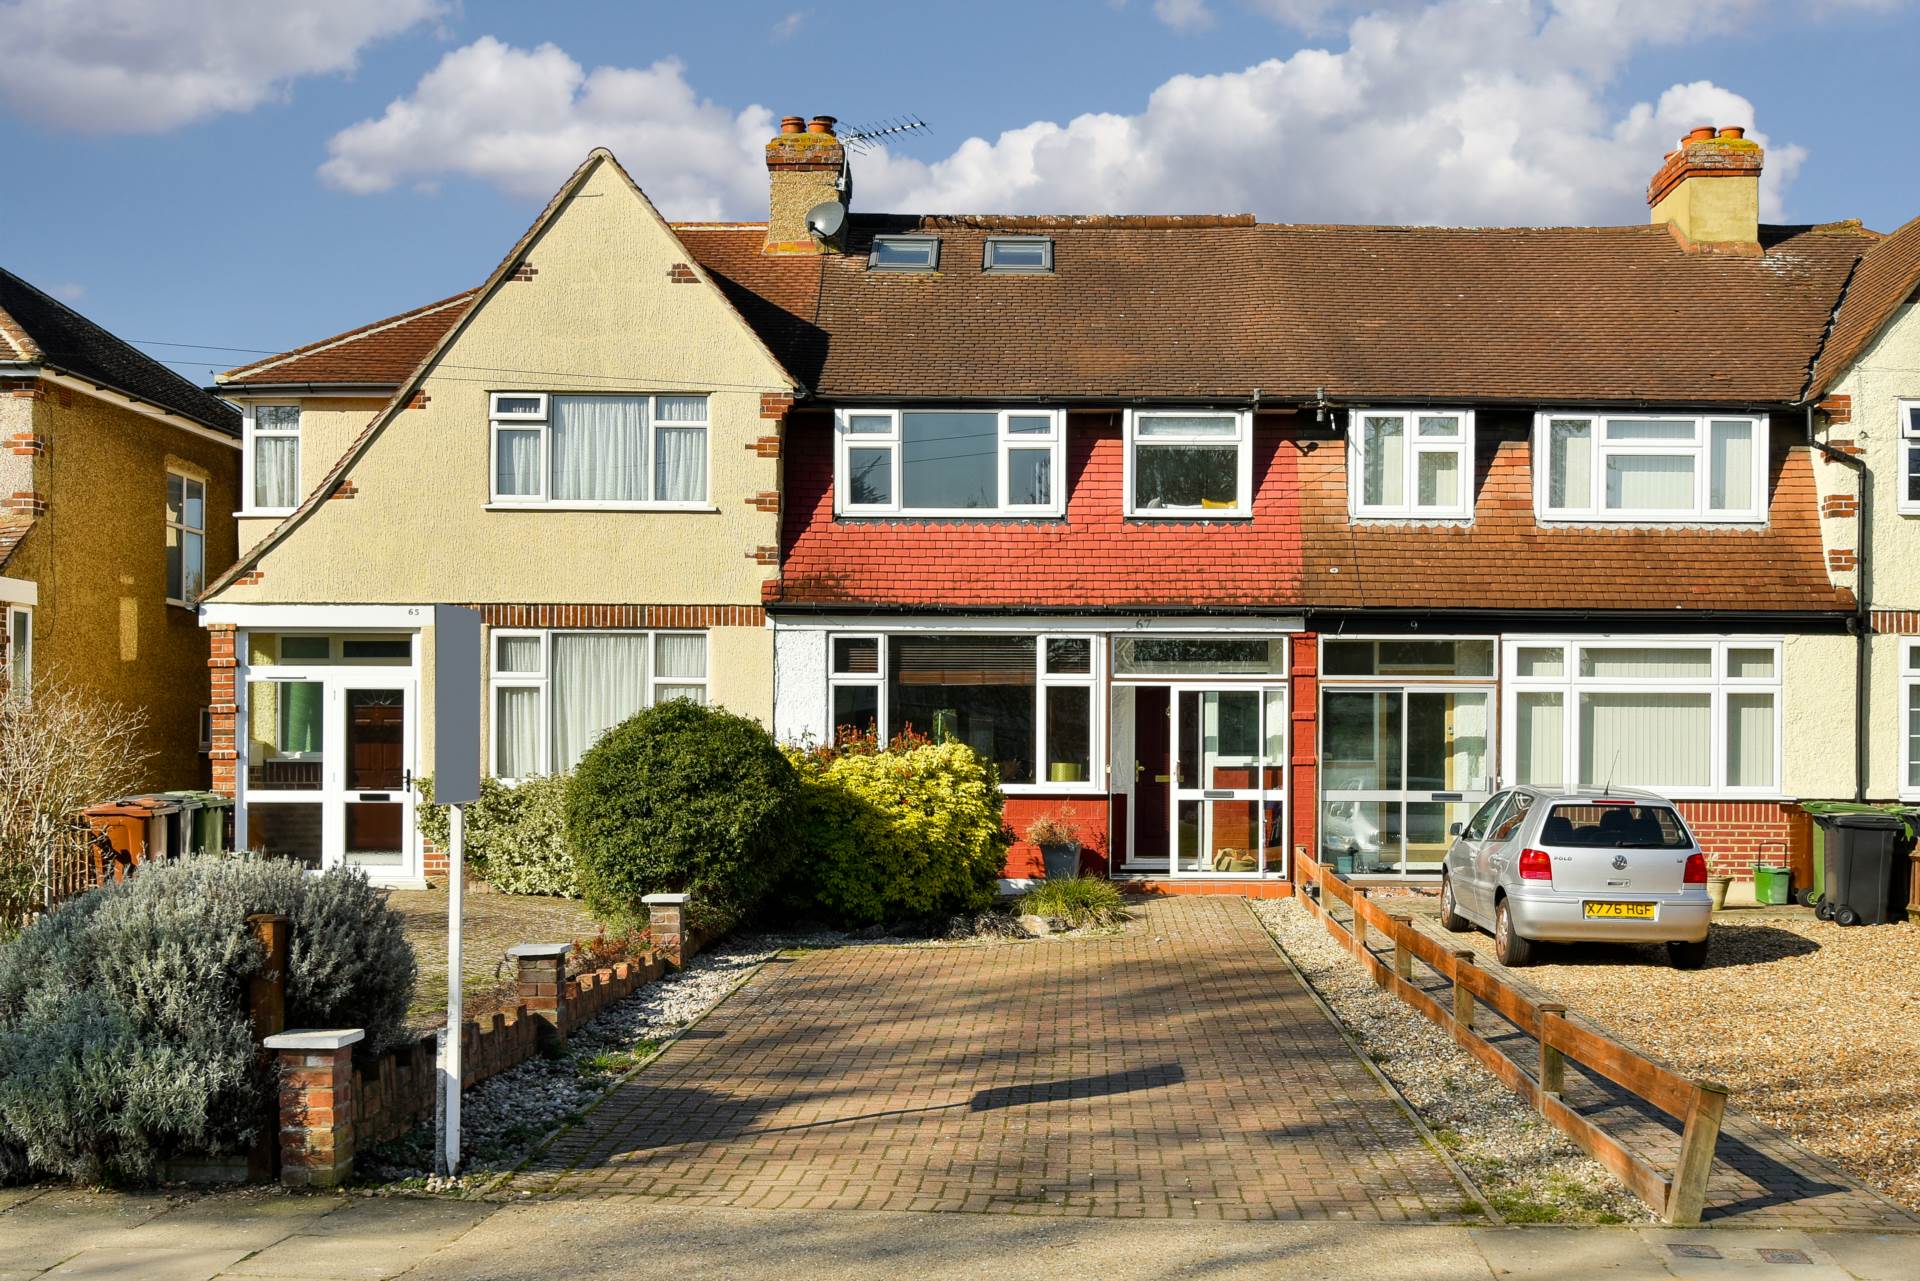 4 bed Mid Terraced House for rent in Epsom. From The Personal Agent - Epsom